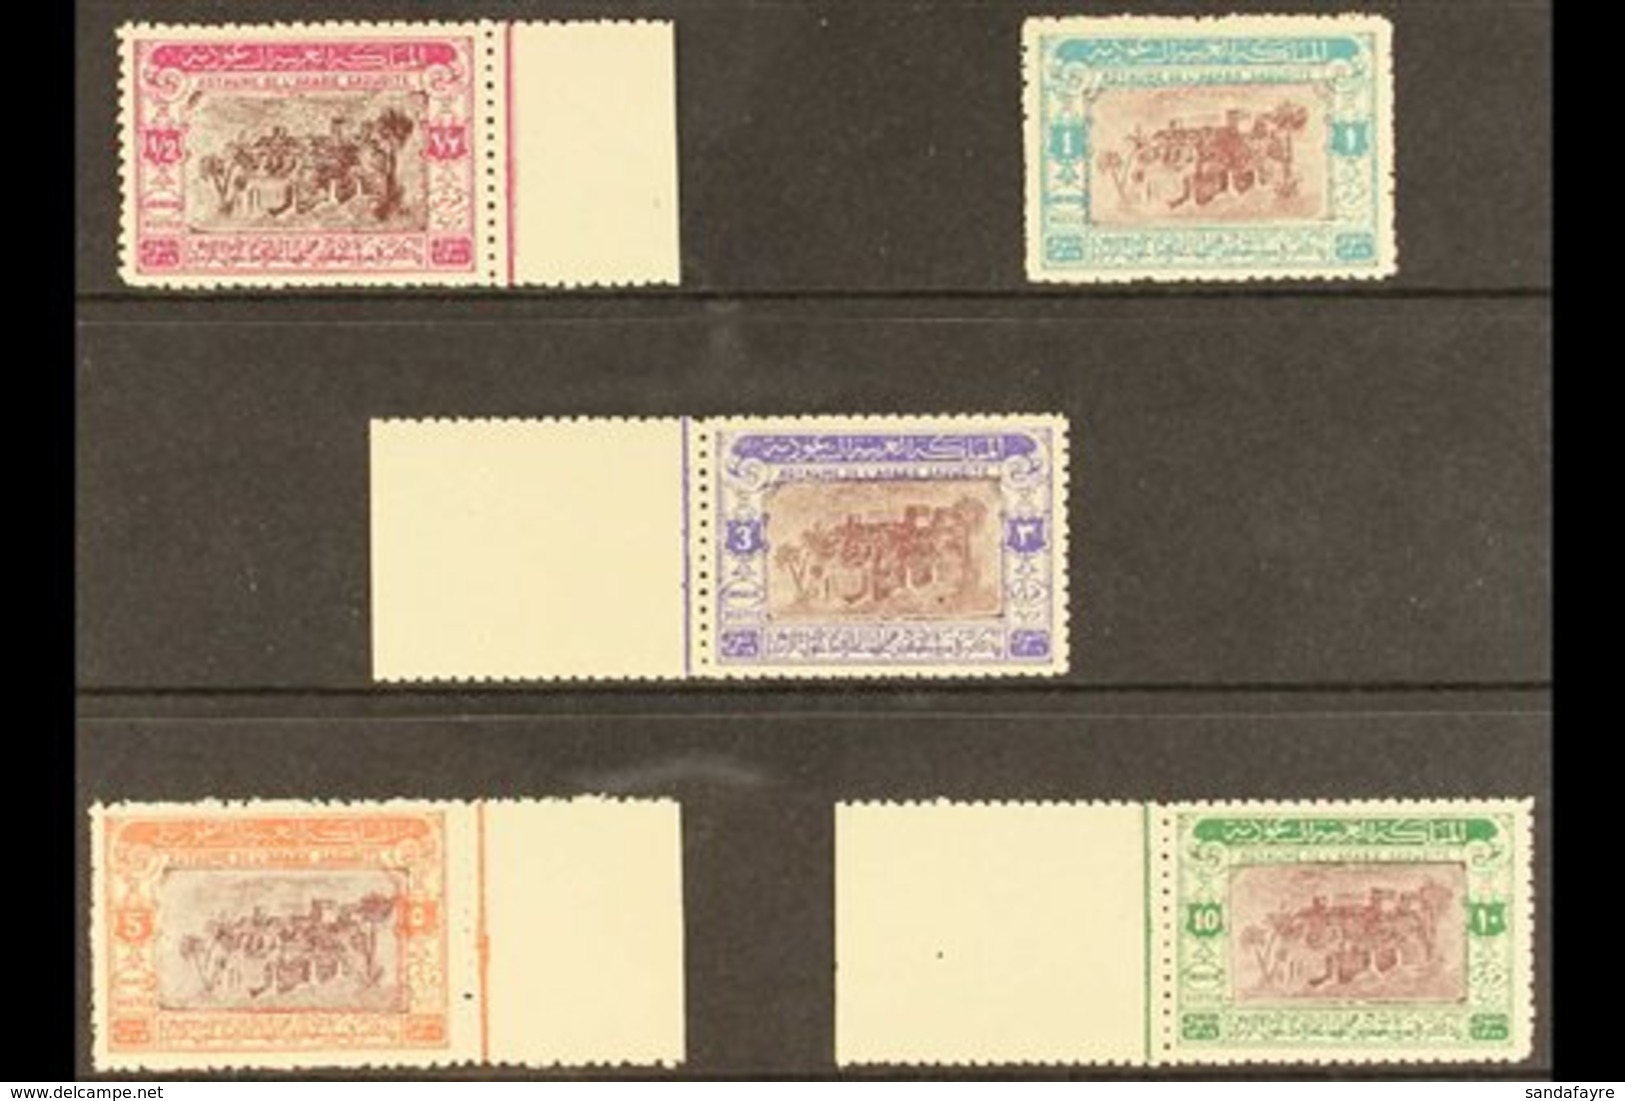 1950 50th Anniv Of Capture Of Riyadh, SG 365/369, Never Hinged Mint. (5 Stamps) For More Images, Please Visit Http://www - Saudi Arabia